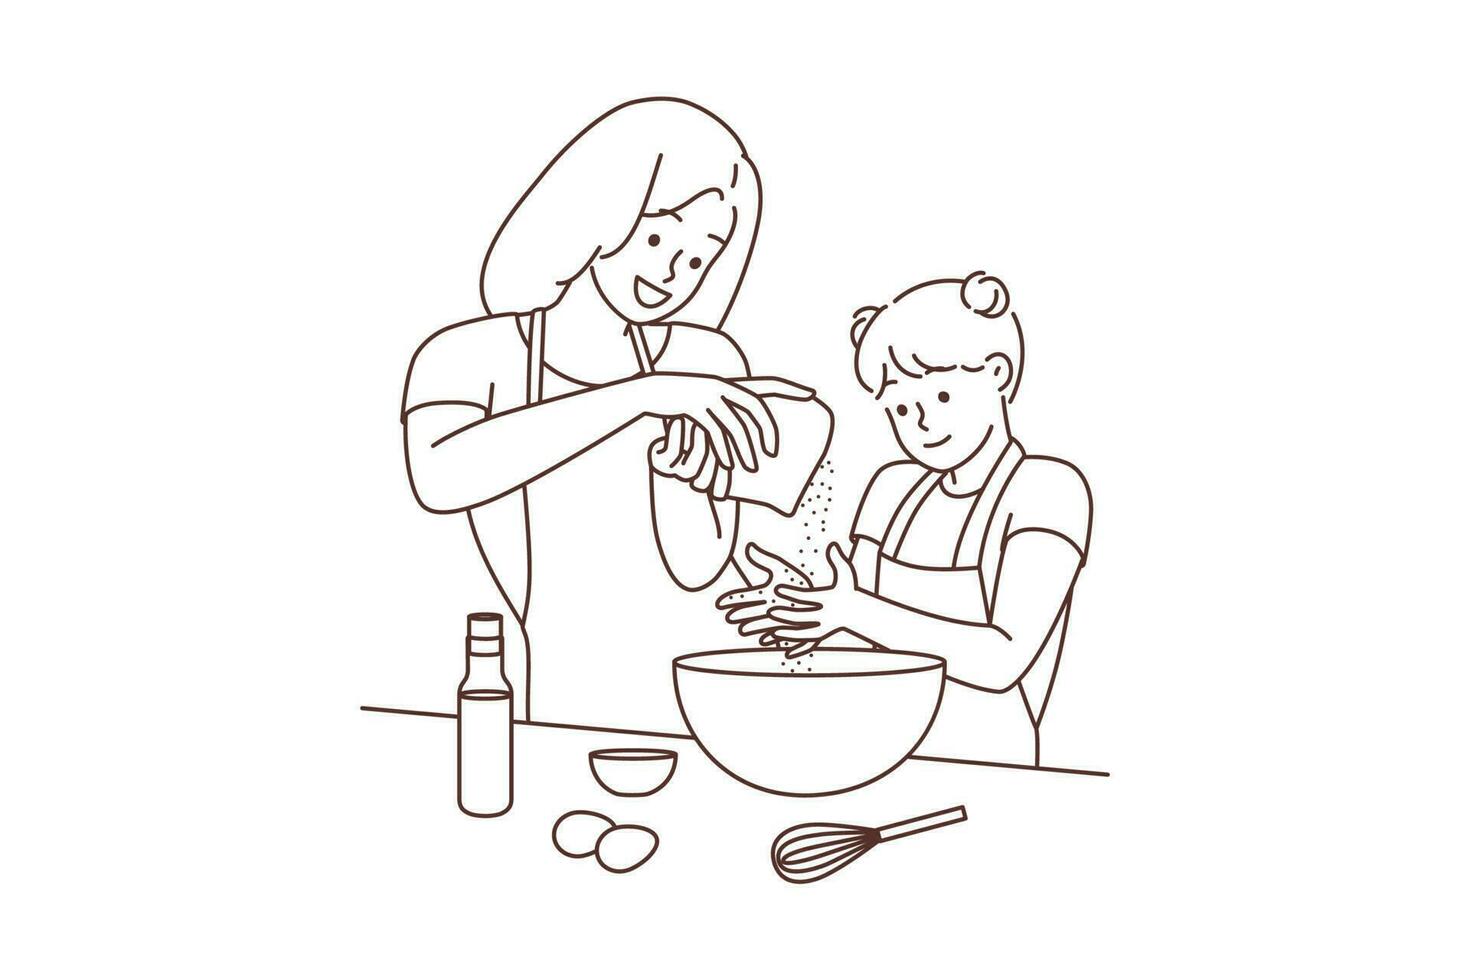 Happy young mother and daughter cooking at home together. Smiling mom and girl child have fun baking in kitchen. Motherhood concept. Vector illustration.